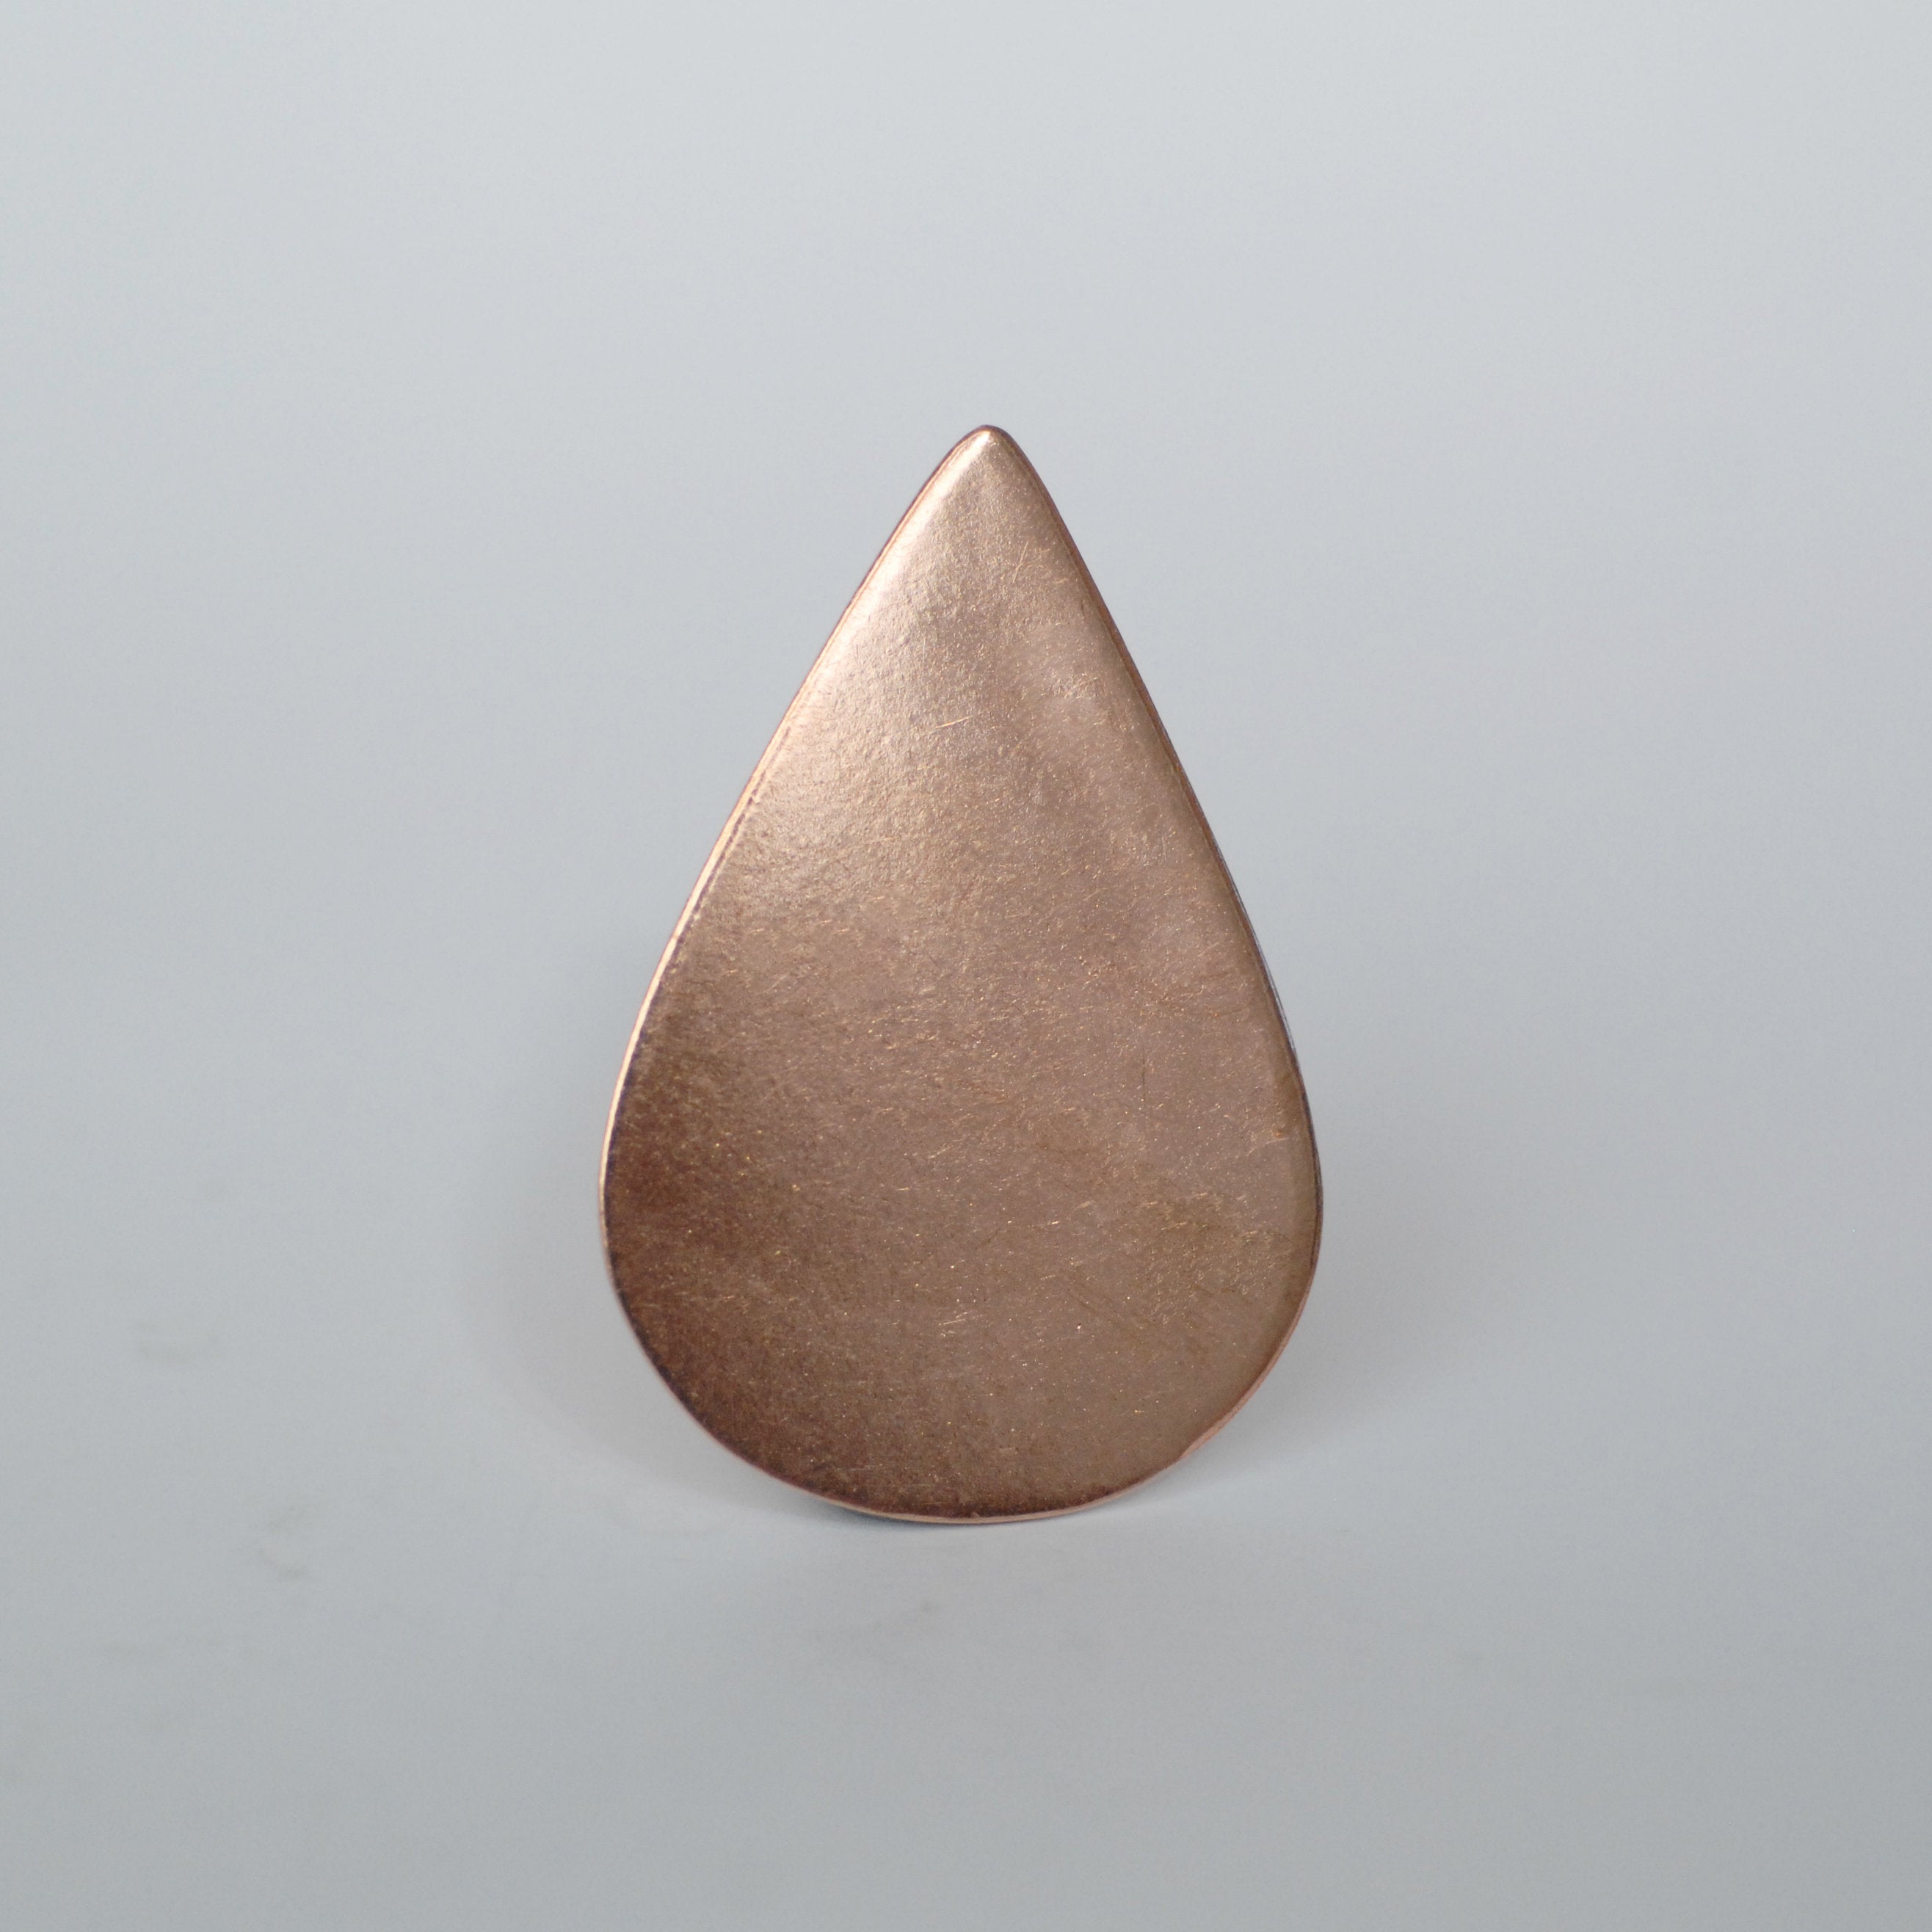 Large Pointed Teardrop 51mm x 34mm metal blanks for making jewelry Solid copper, brass, bronze, nickel silver